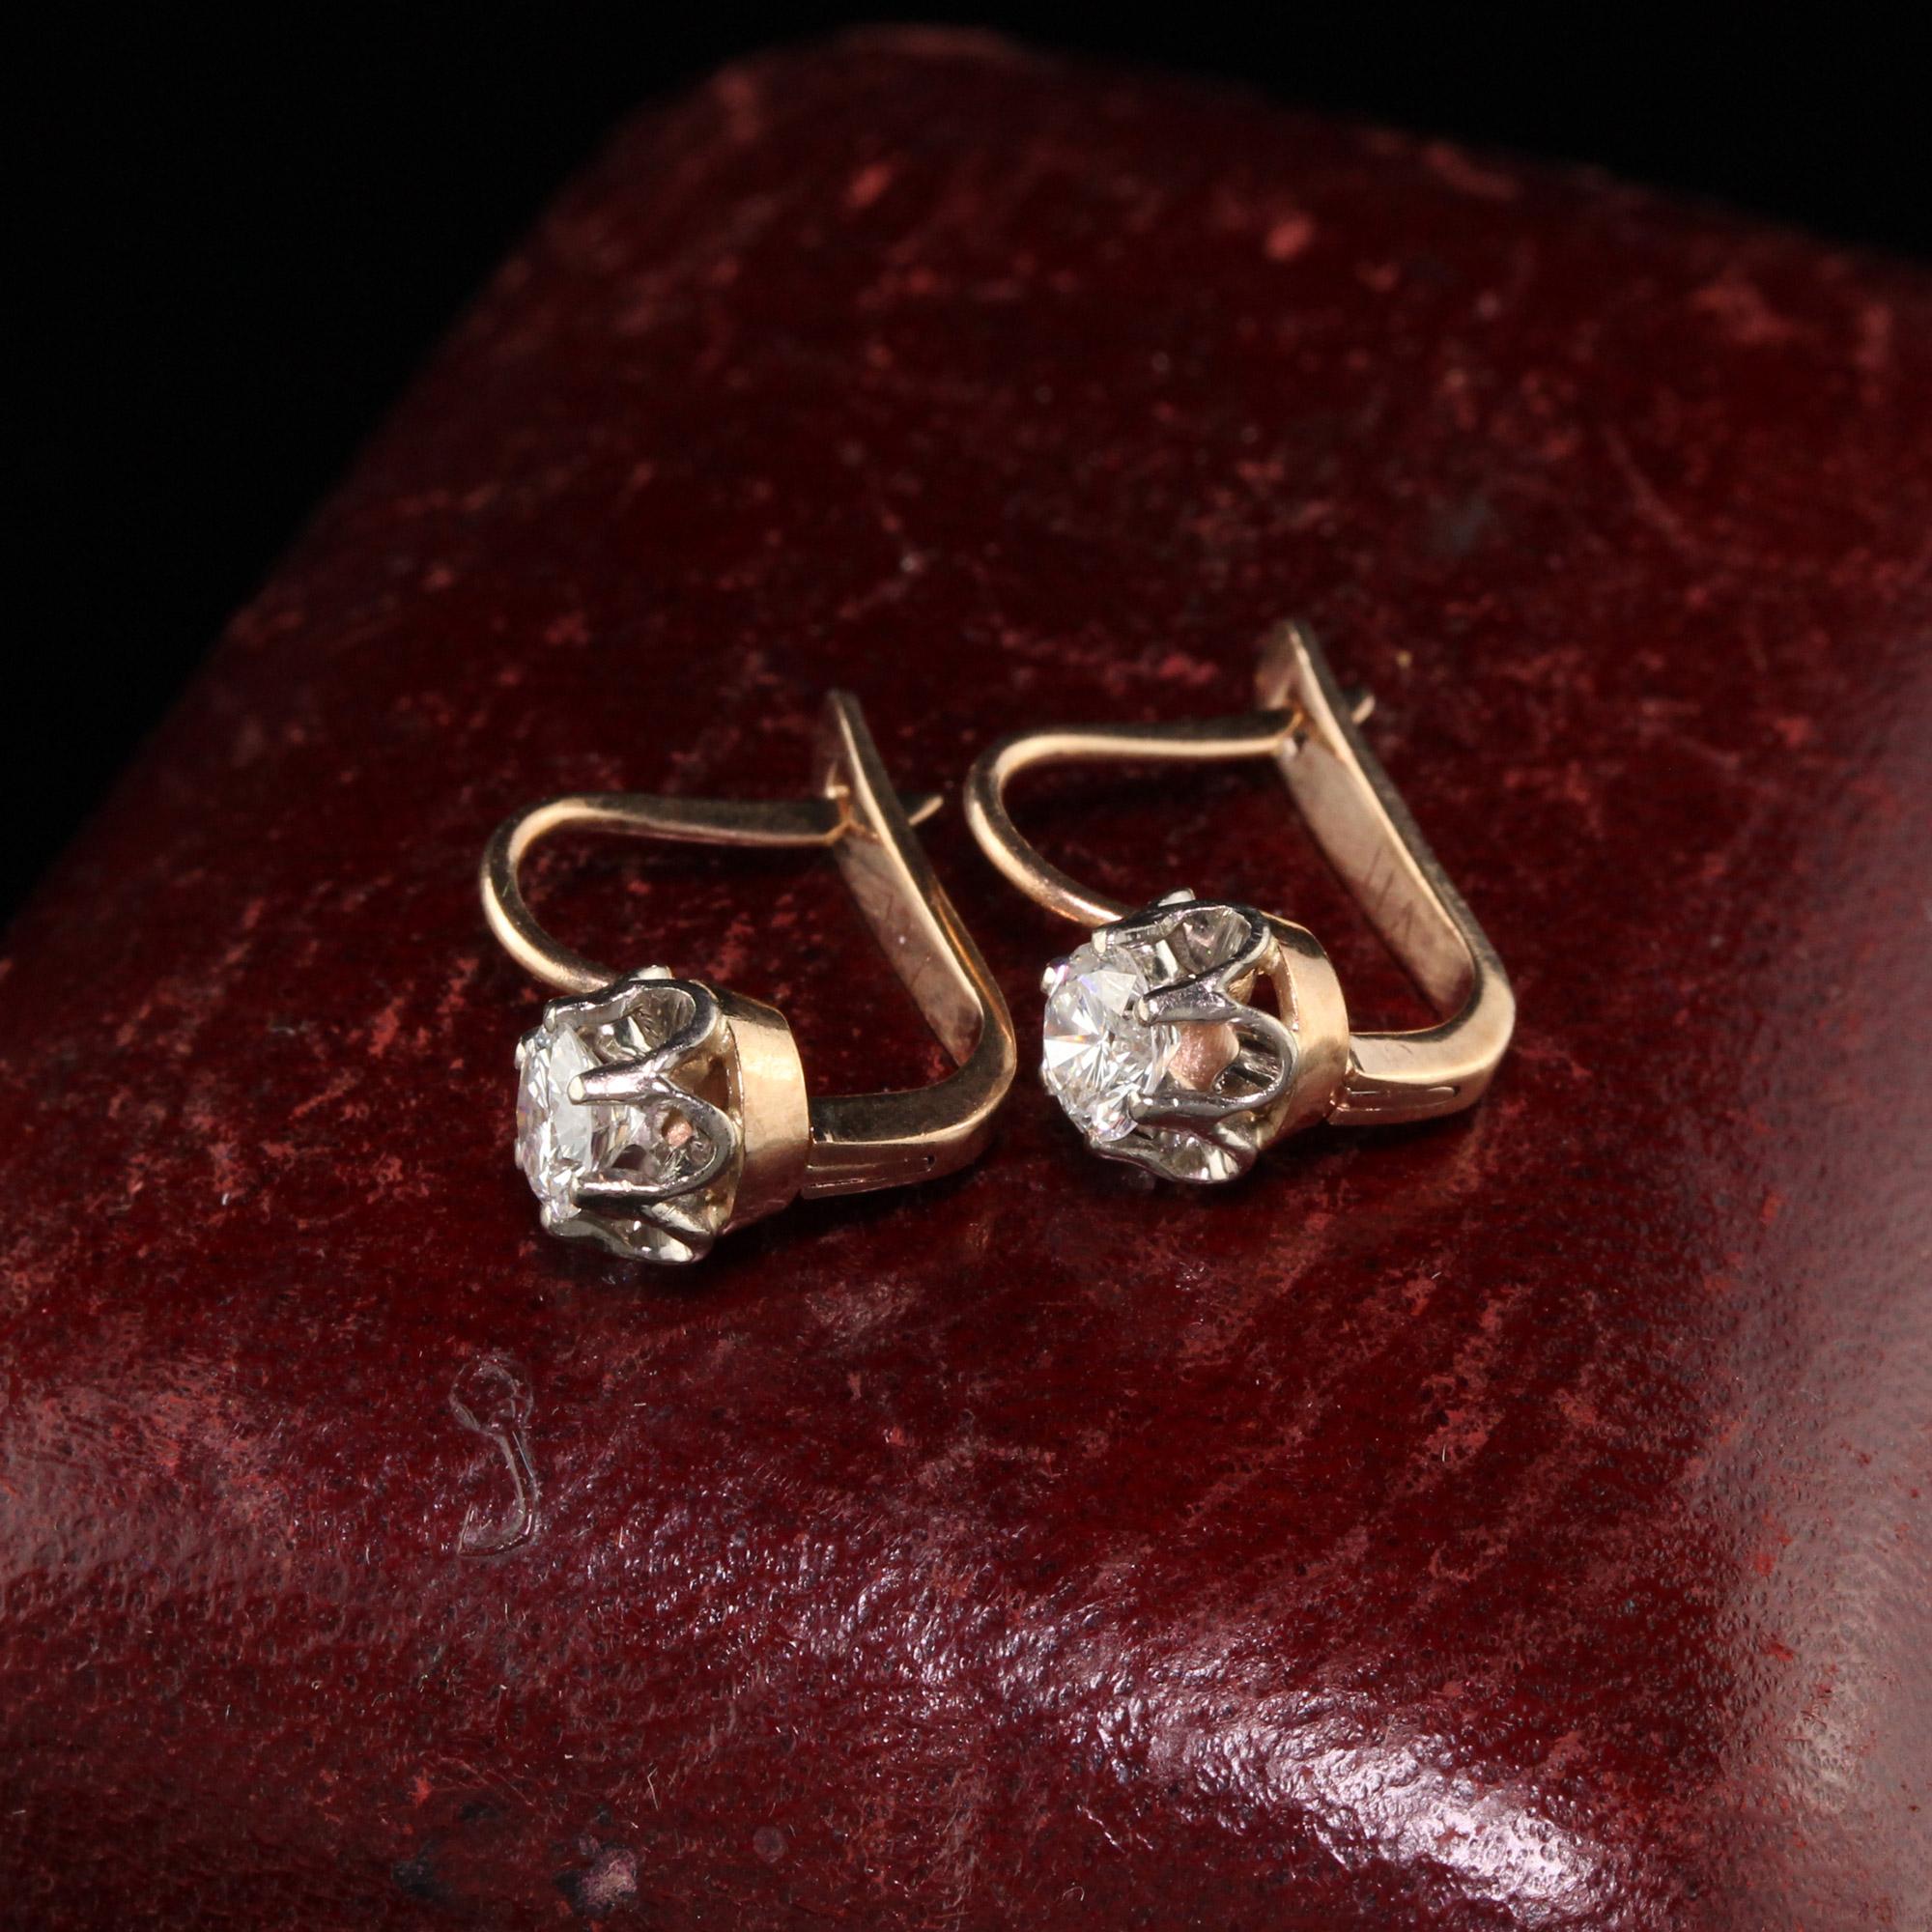 Gorgeous Antique Victorian Russian 14K Rose Gold Diamond Drop Earrings. This gorgeous pair of earrings have Russian hallmarks on both sides of the earrings and have very high quality diamonds in them. They are in great condition.

Item